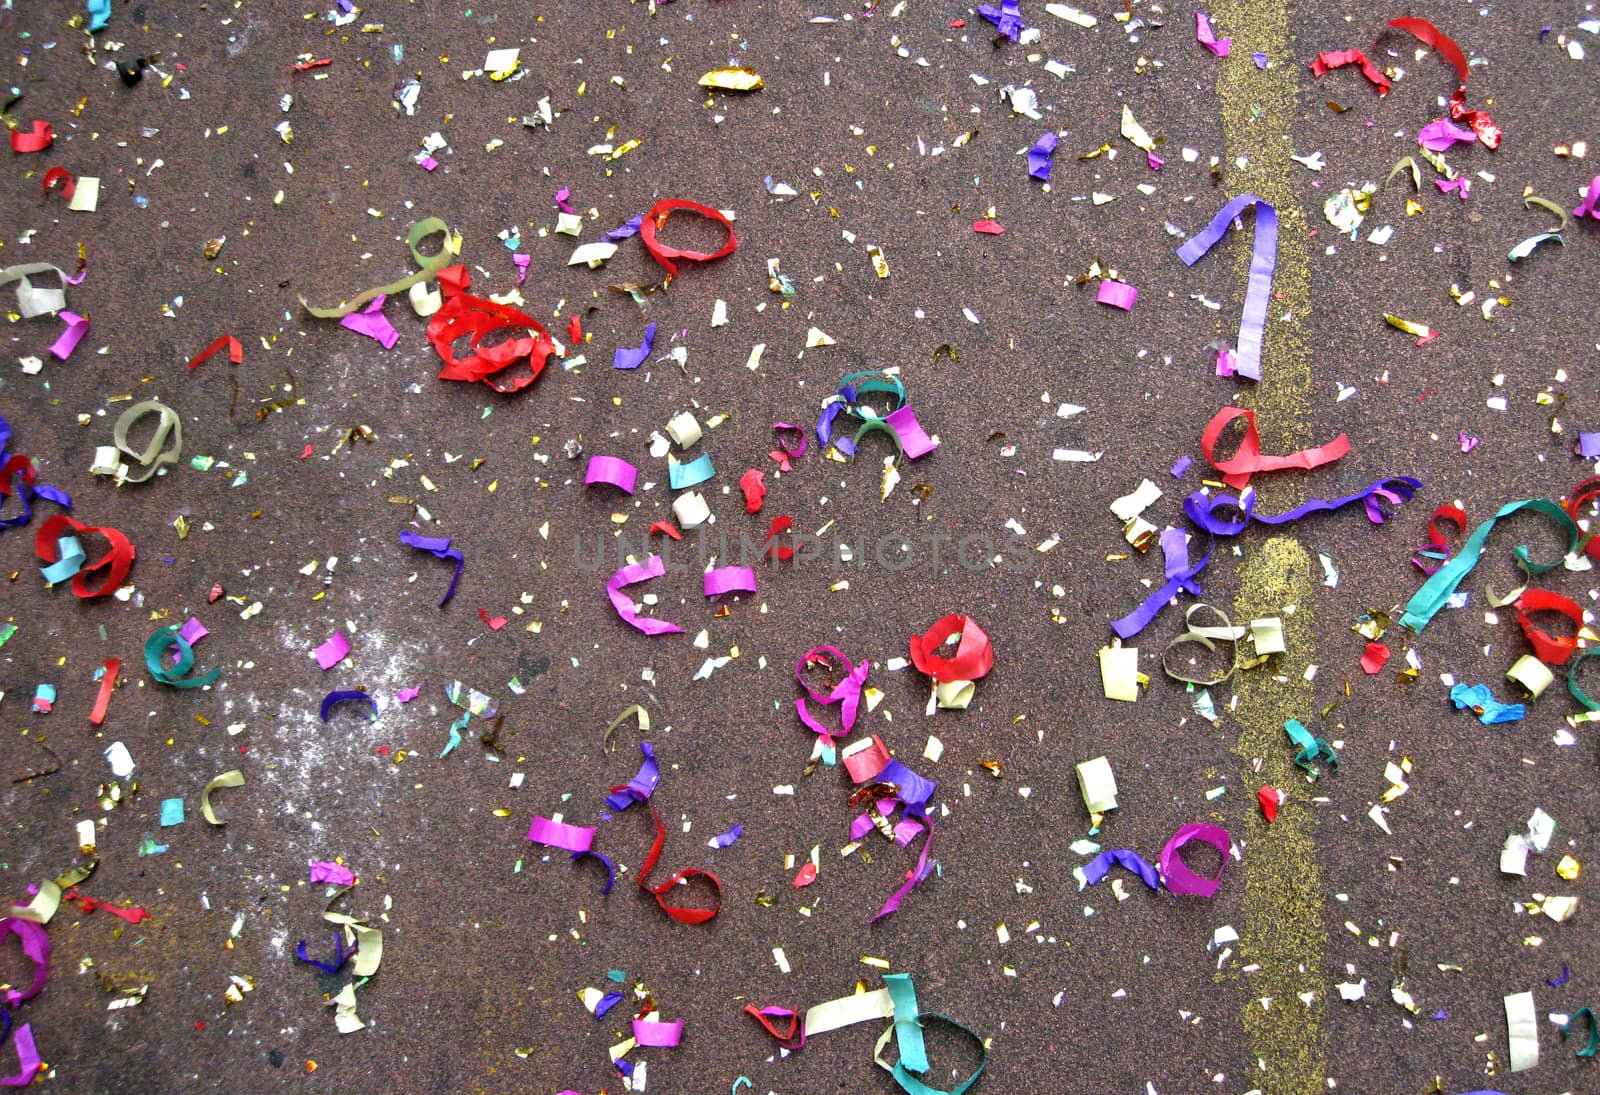 Colorful confetti in street by ftlaudgirl